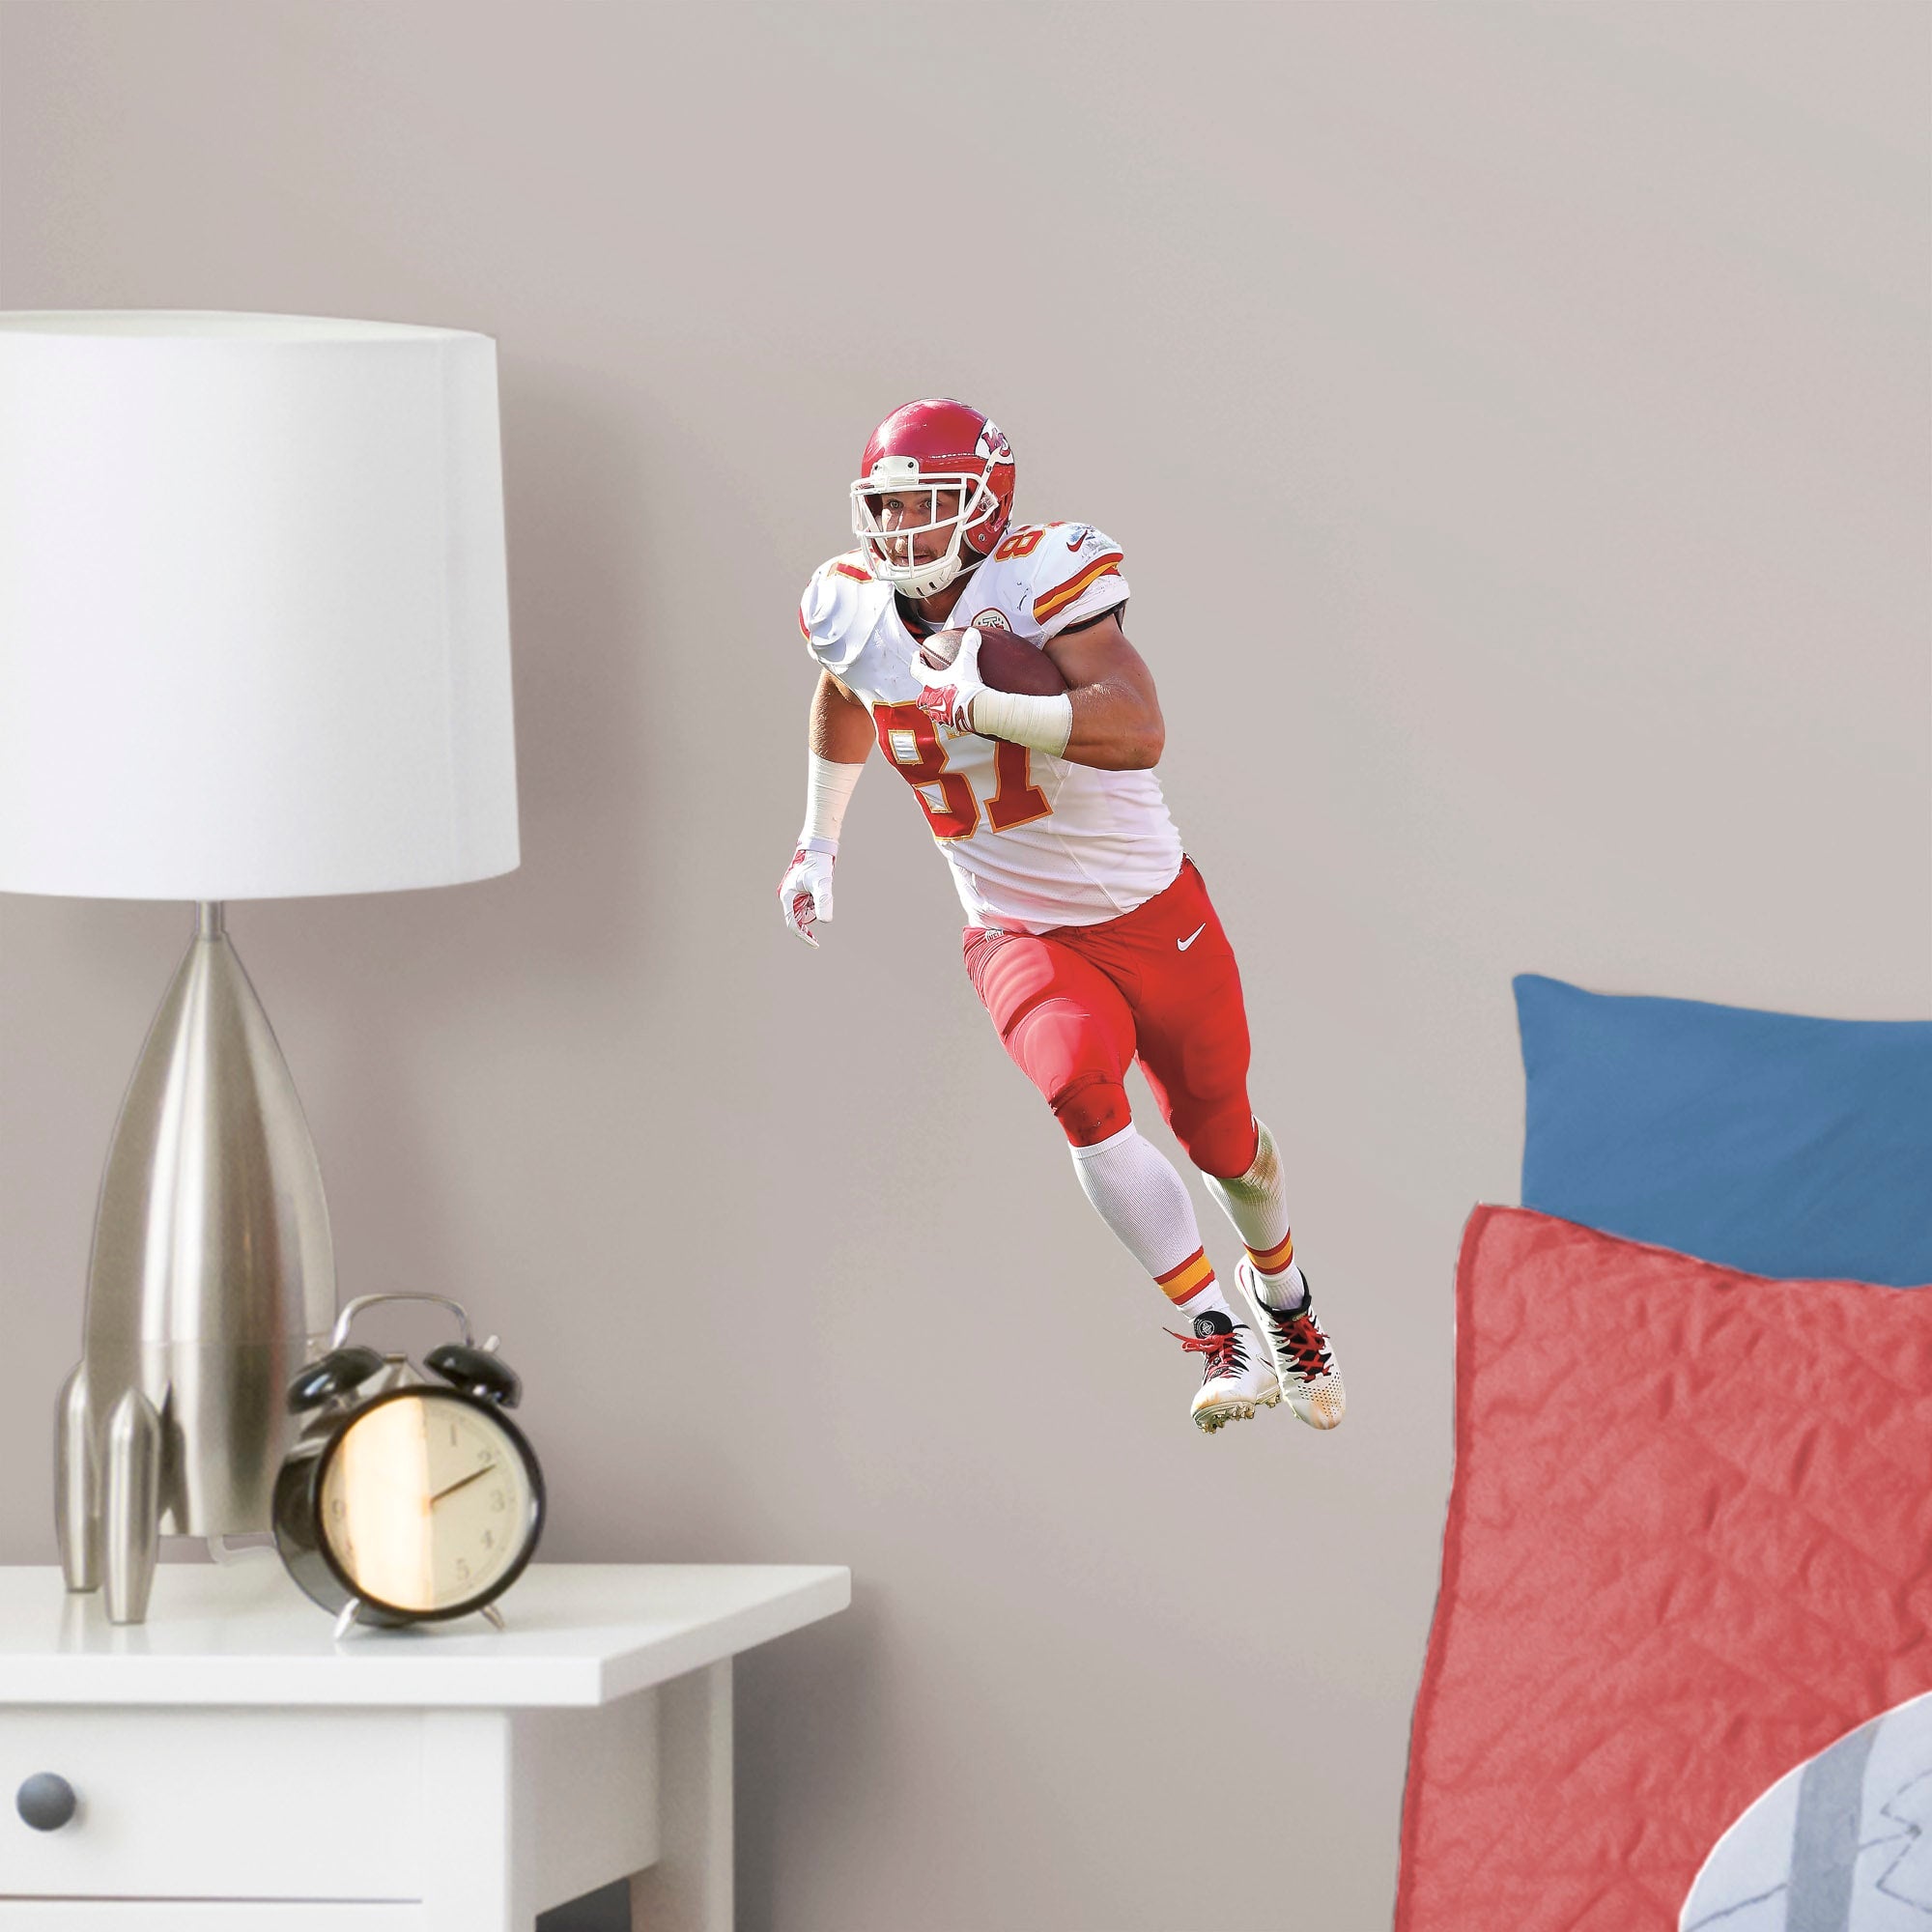 Travis Kelce for Kansas City Chiefs - Officially Licensed NFL Removable Wall Decal Large by Fathead | Vinyl